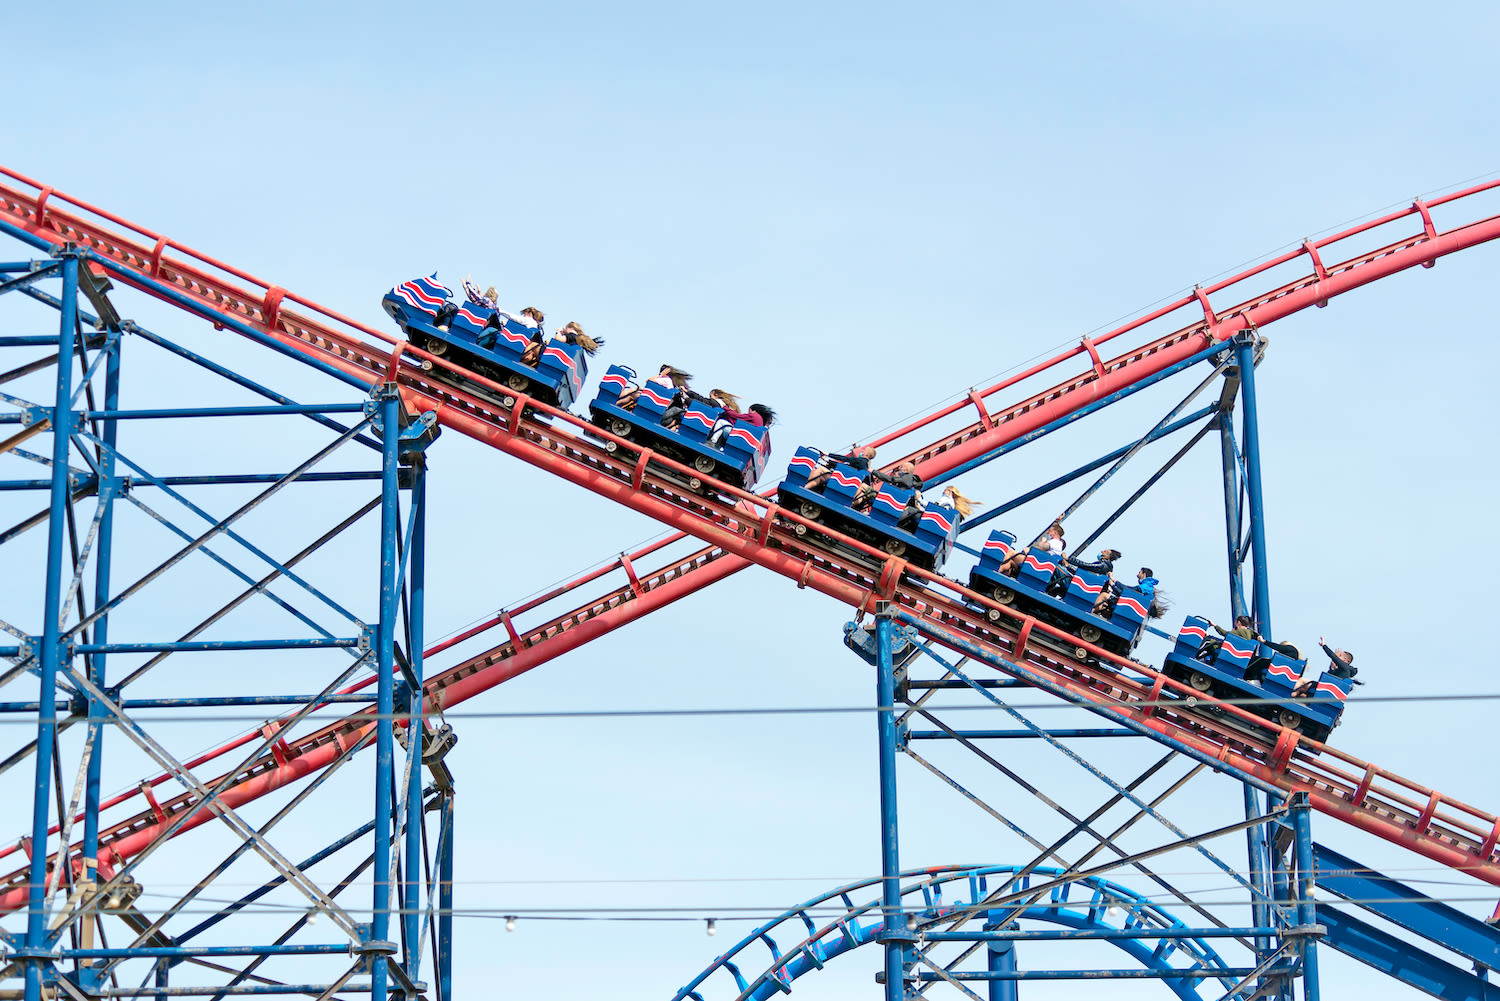 What would happen if you rode a roller coaster without a harness